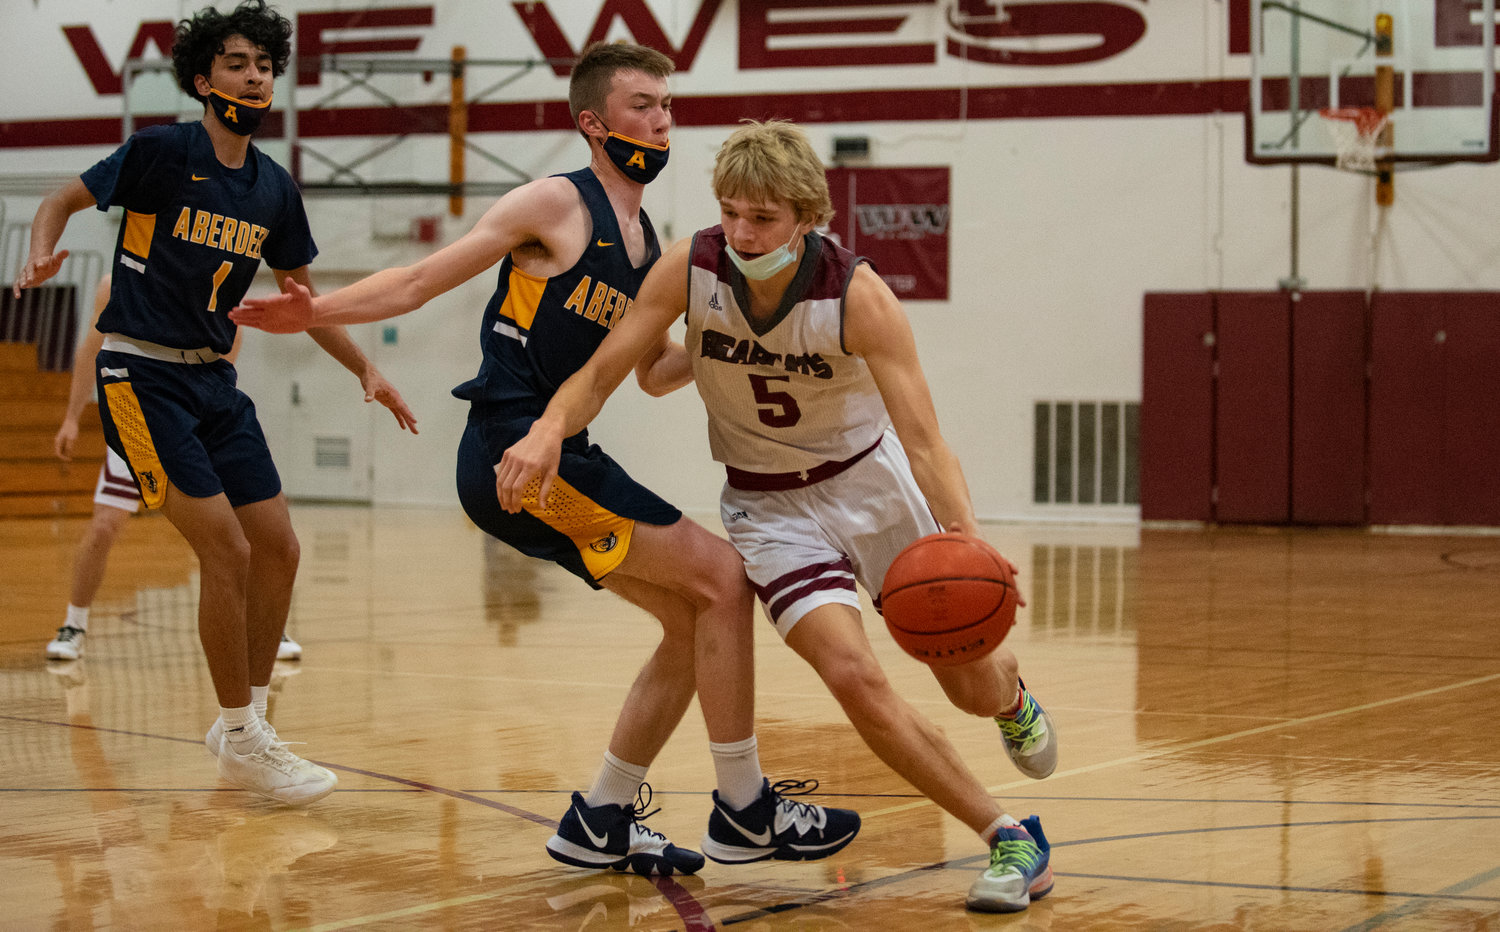 W.F. West junior Dirk Plakinger drives around an Aberdeen defender during the second quarter of Saturday's game.